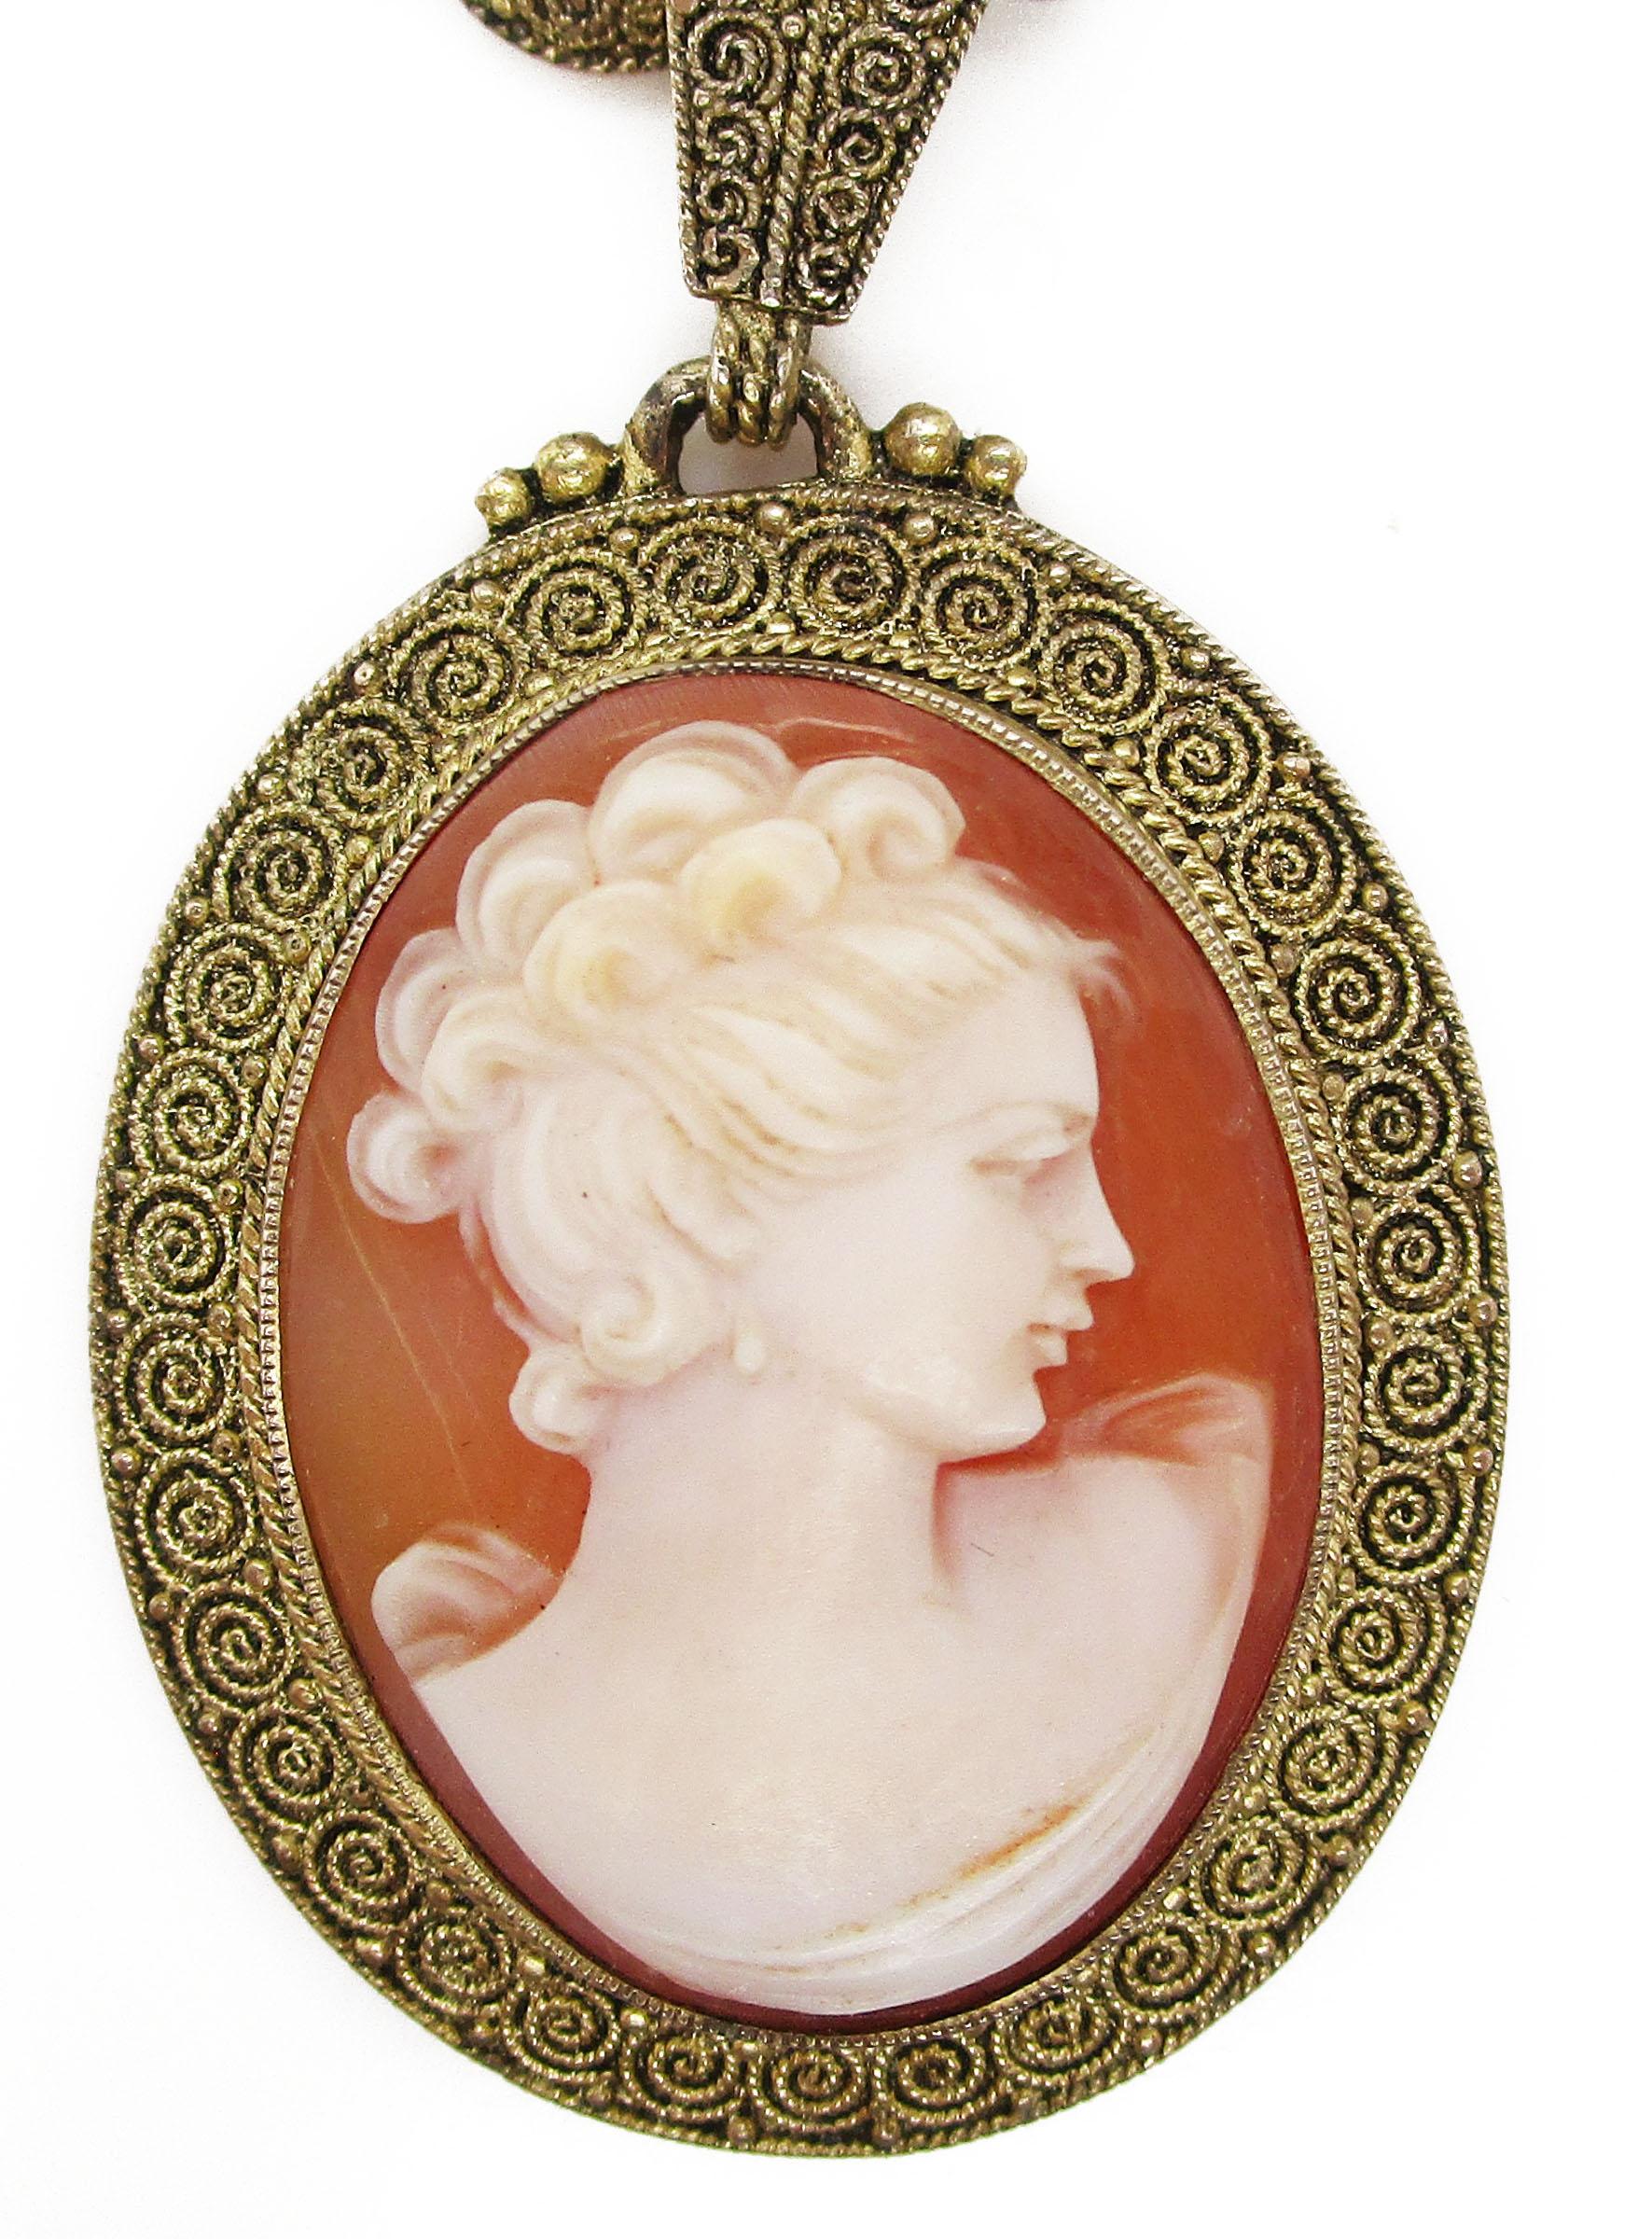 1880 Etruscan Vermeil Theodor Fahrner Shell Cameo Necklace In Excellent Condition For Sale In Lexington, KY